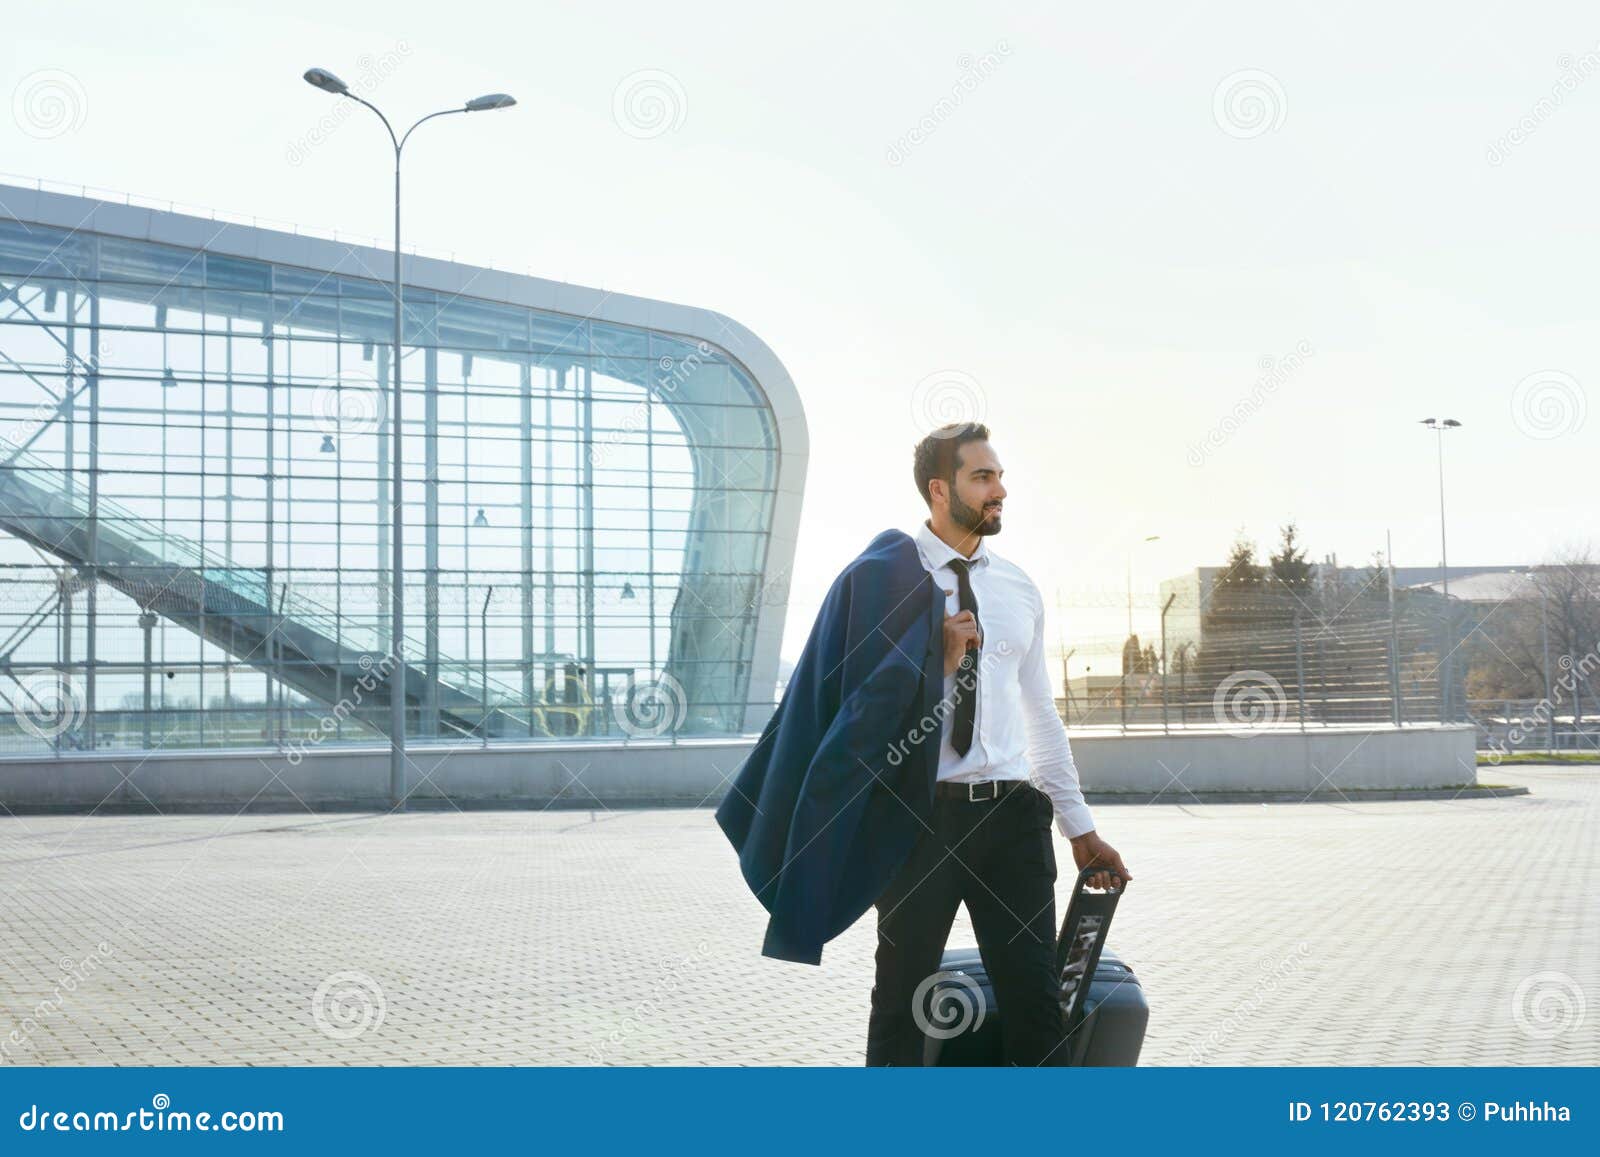 business man travelling